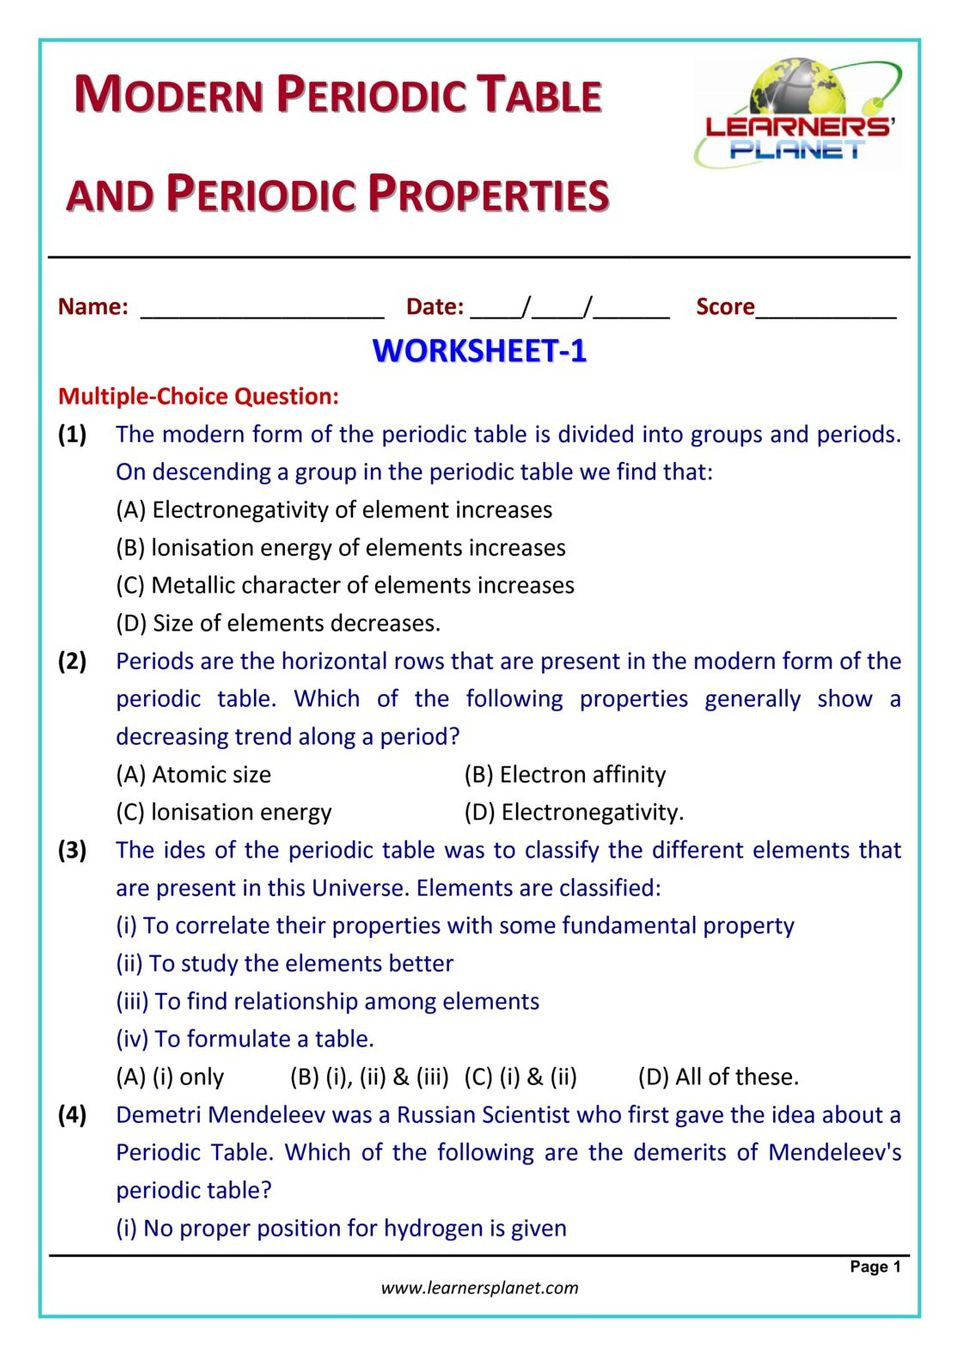 Chemistry Periodic Table Worksheet Grade 10 Chemistry Olympiad Modern Periodic Table